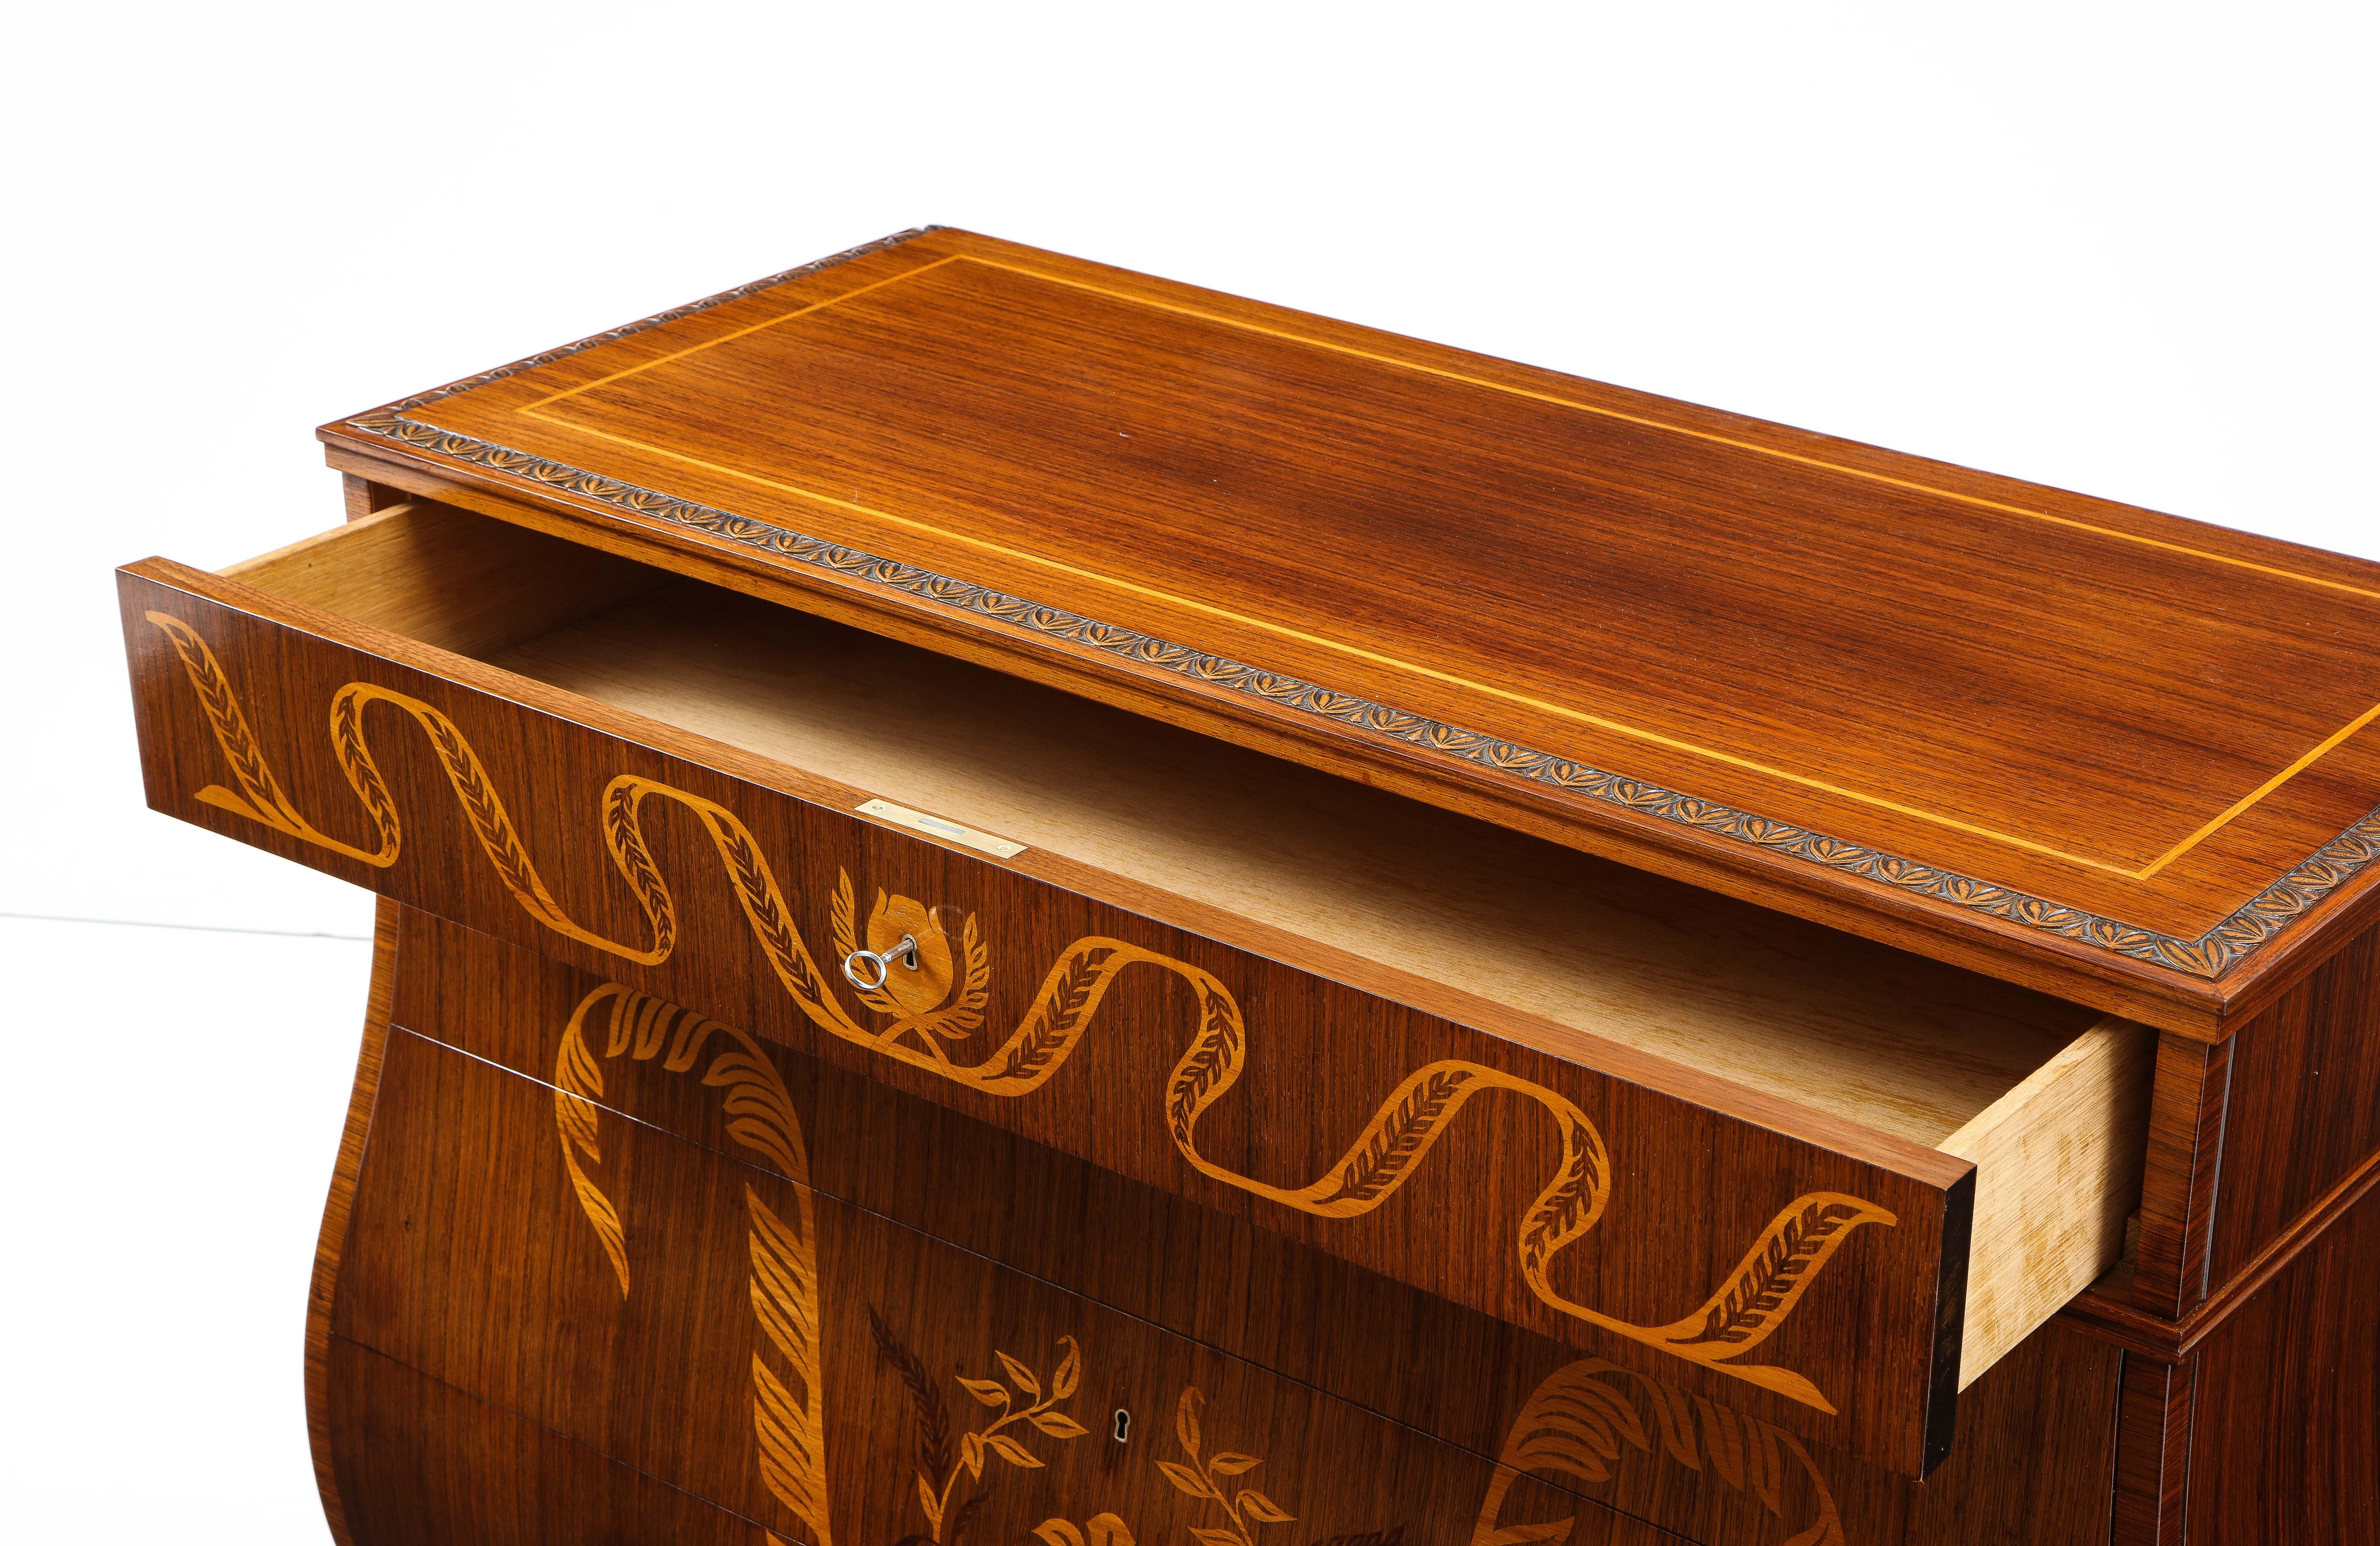 Swedish Grace Fruitwood Inlaid Rosewood Chest of Drawers, Circa 1930-40 2